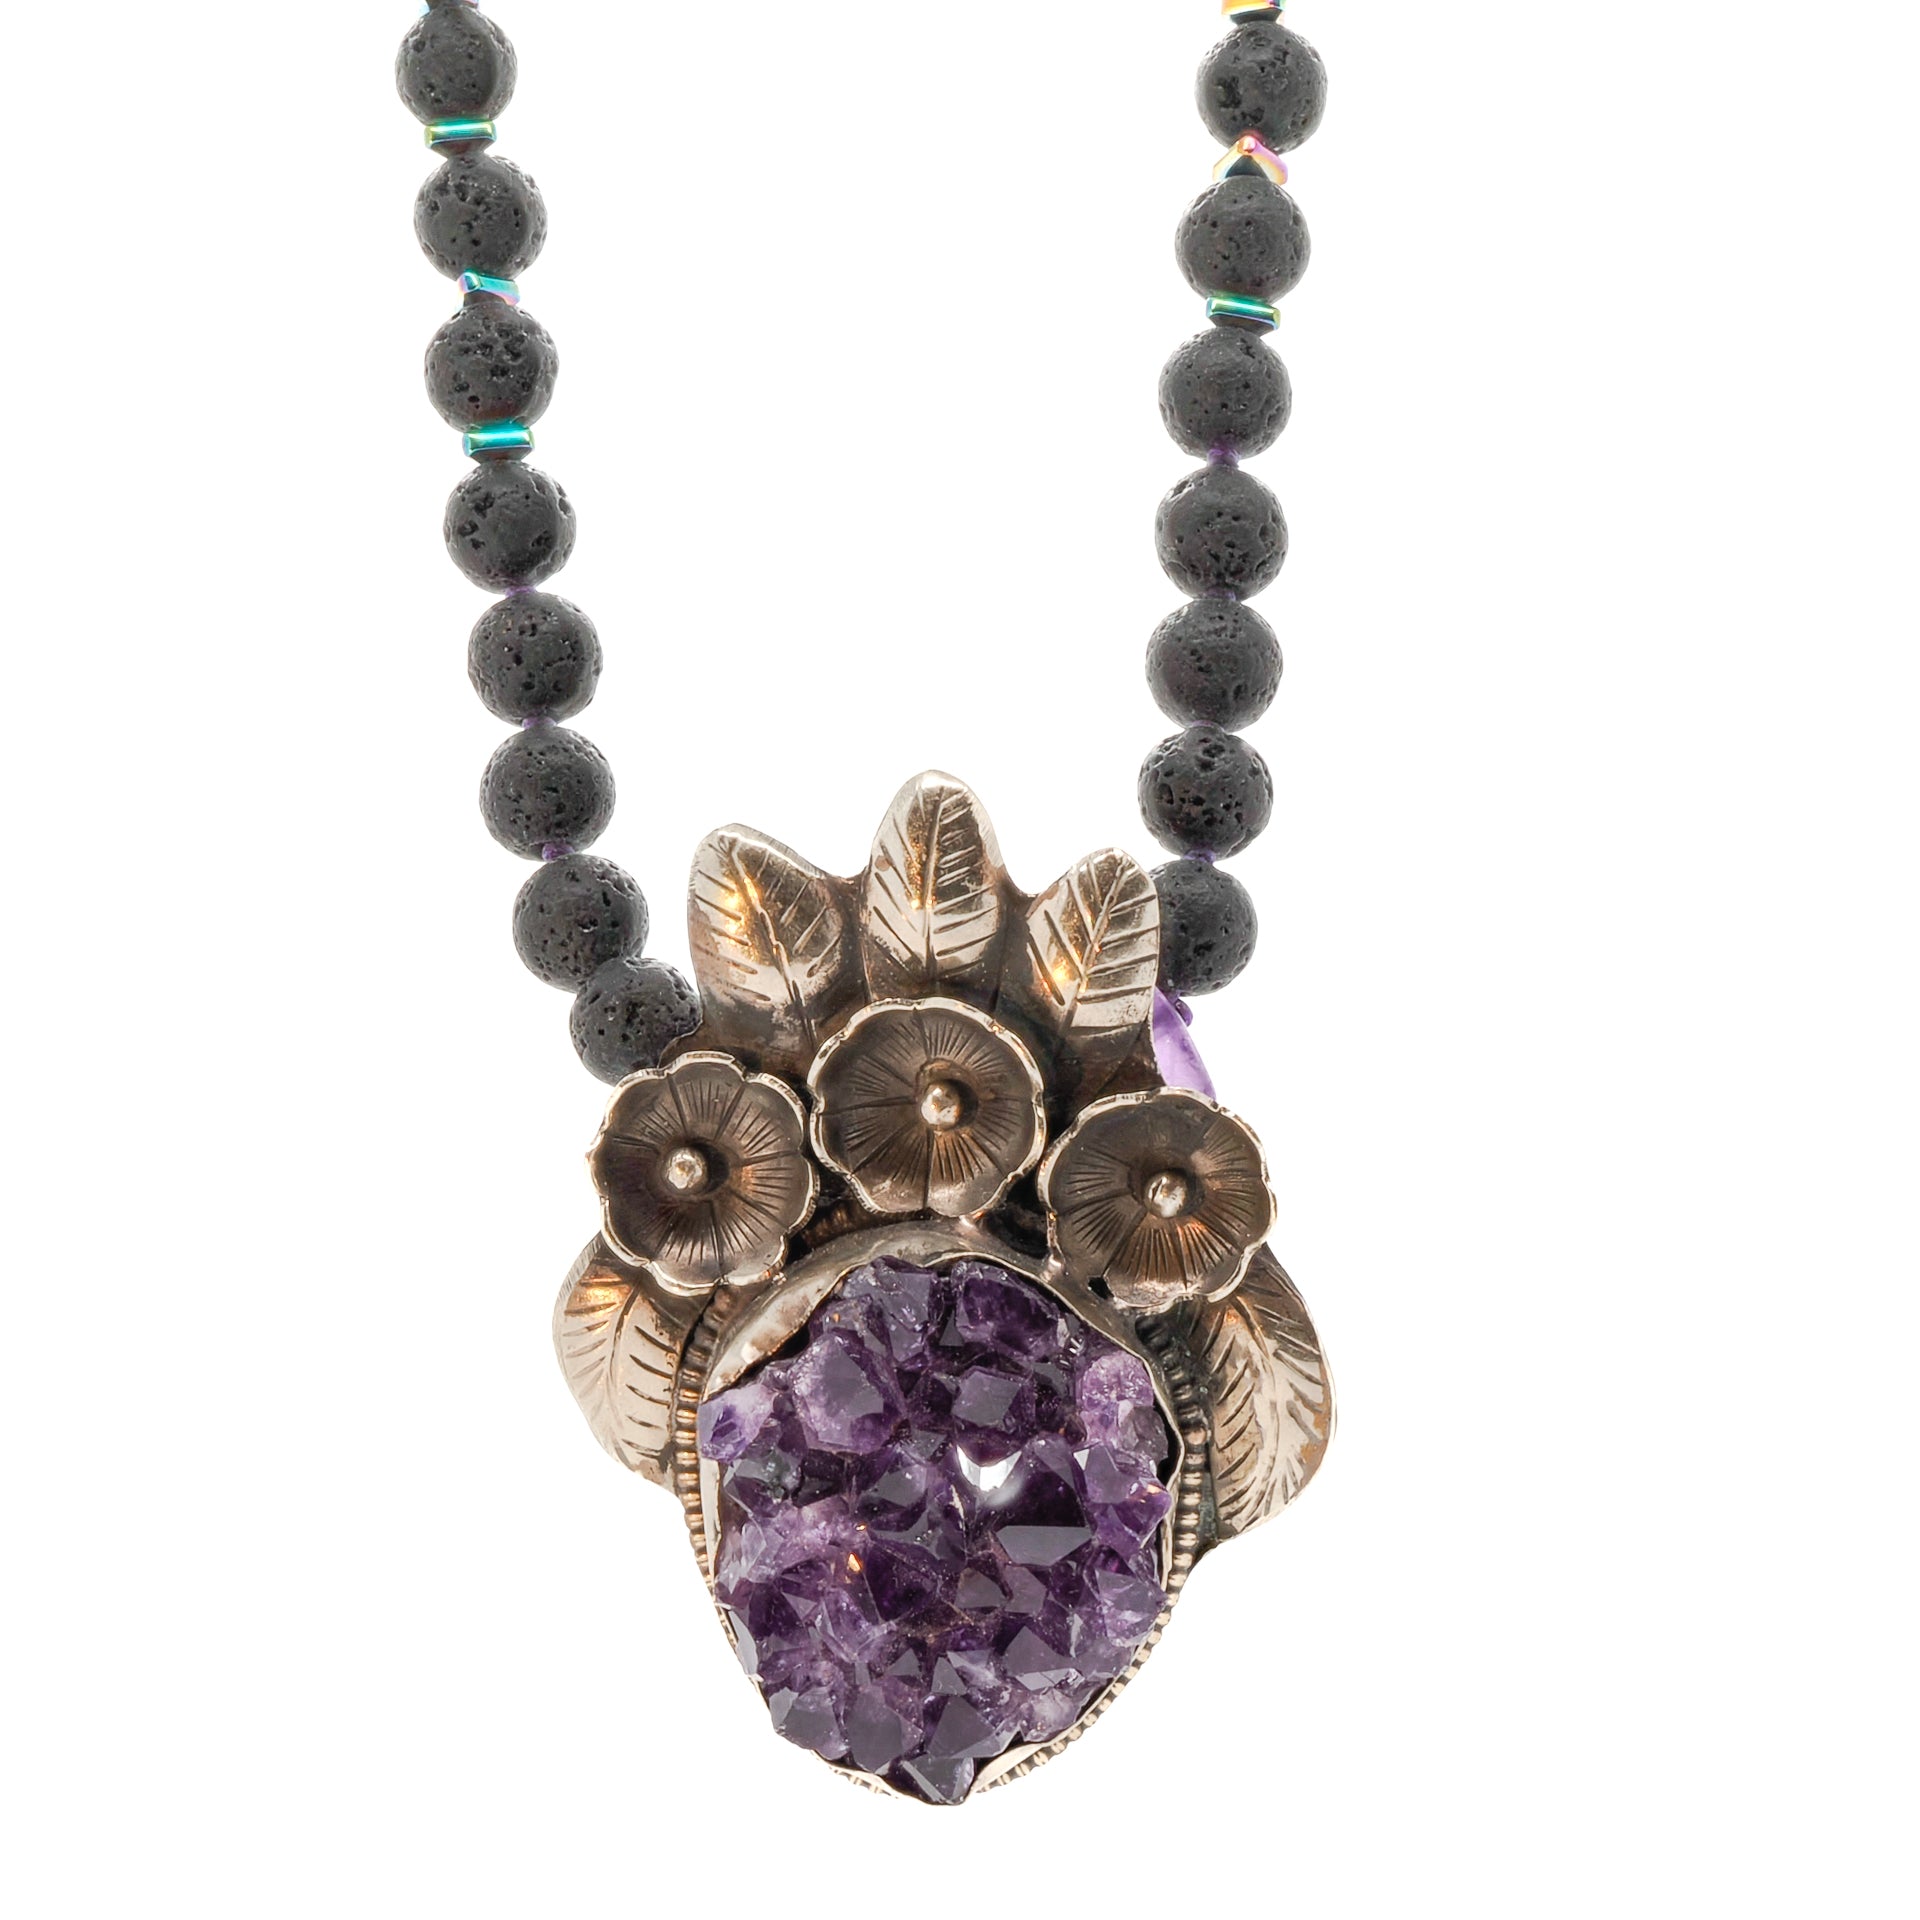 Spiritual Amethyst Necklace showcasing a beautiful flower silver pendant with an amethyst row stone.